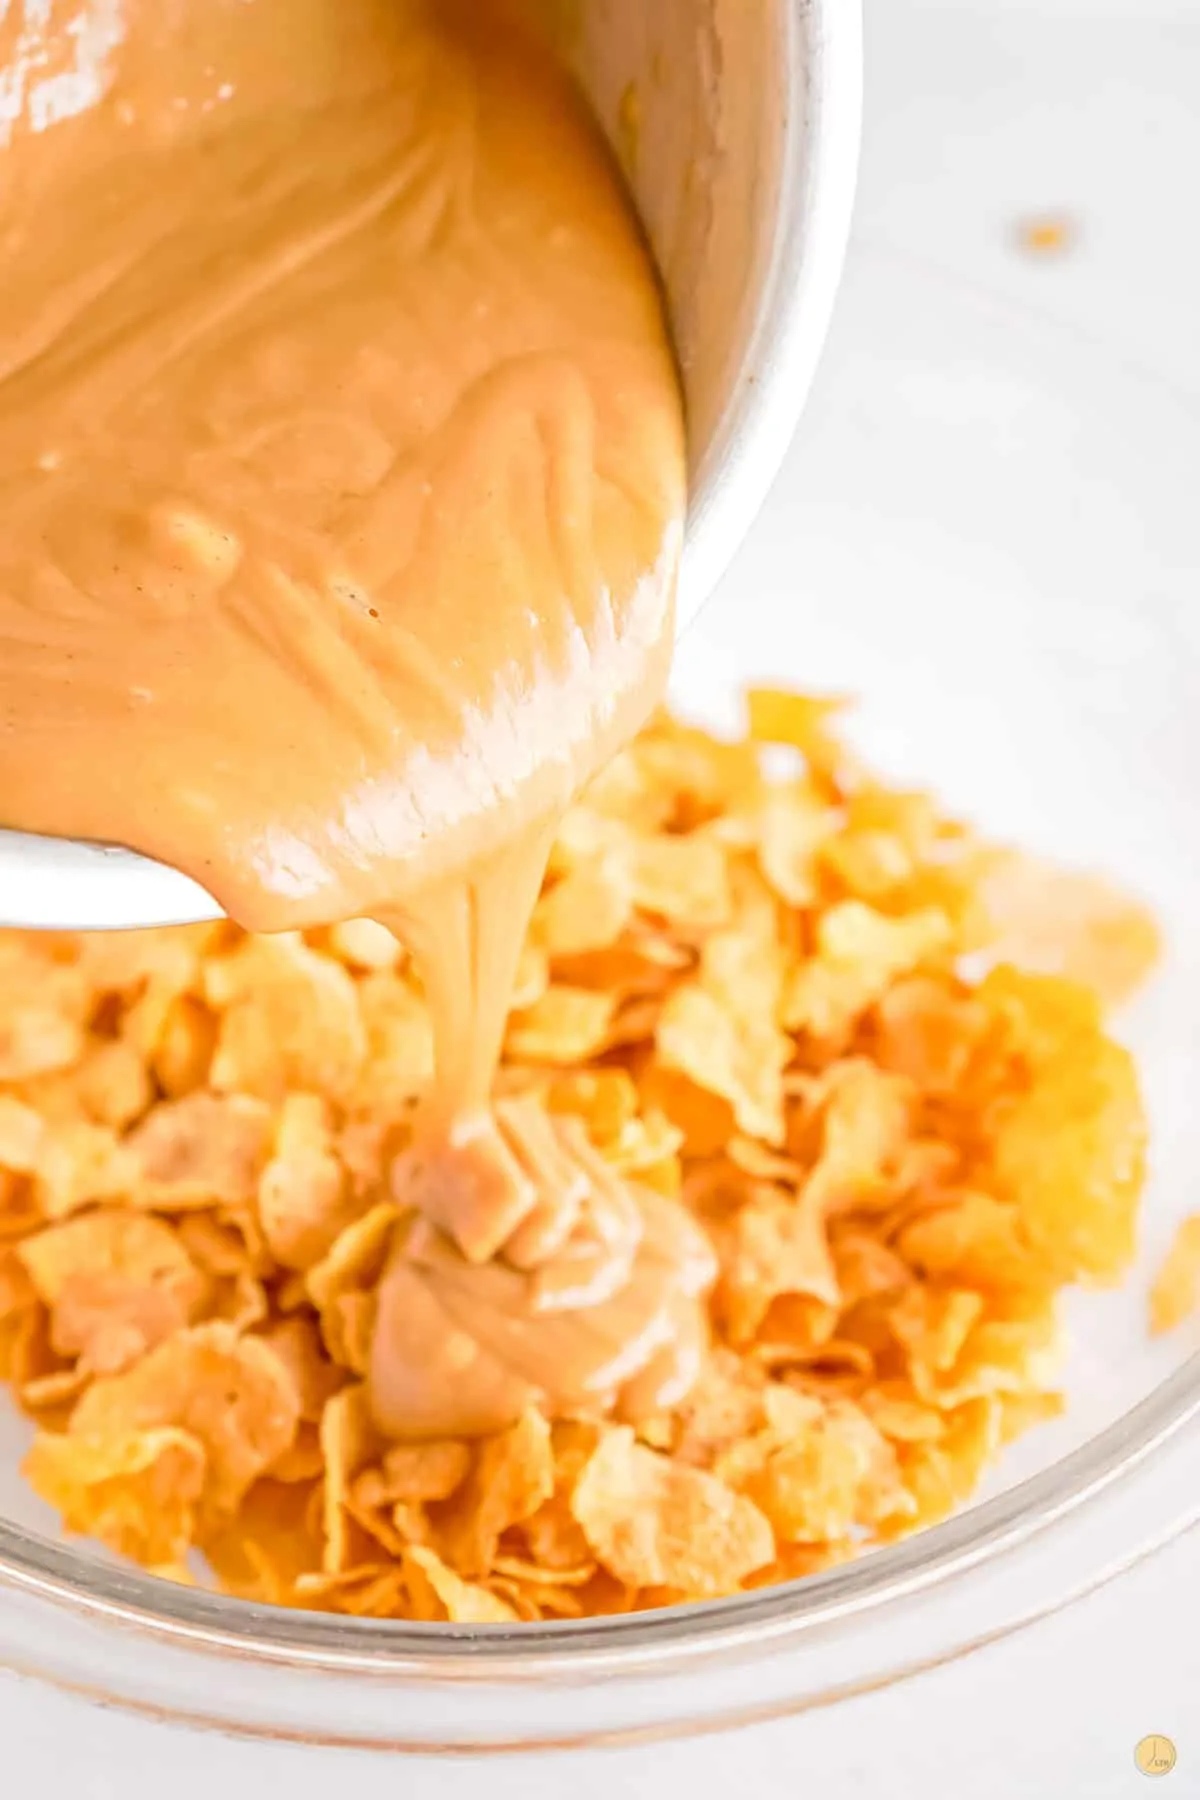 peanut butter pouring over corn flakes